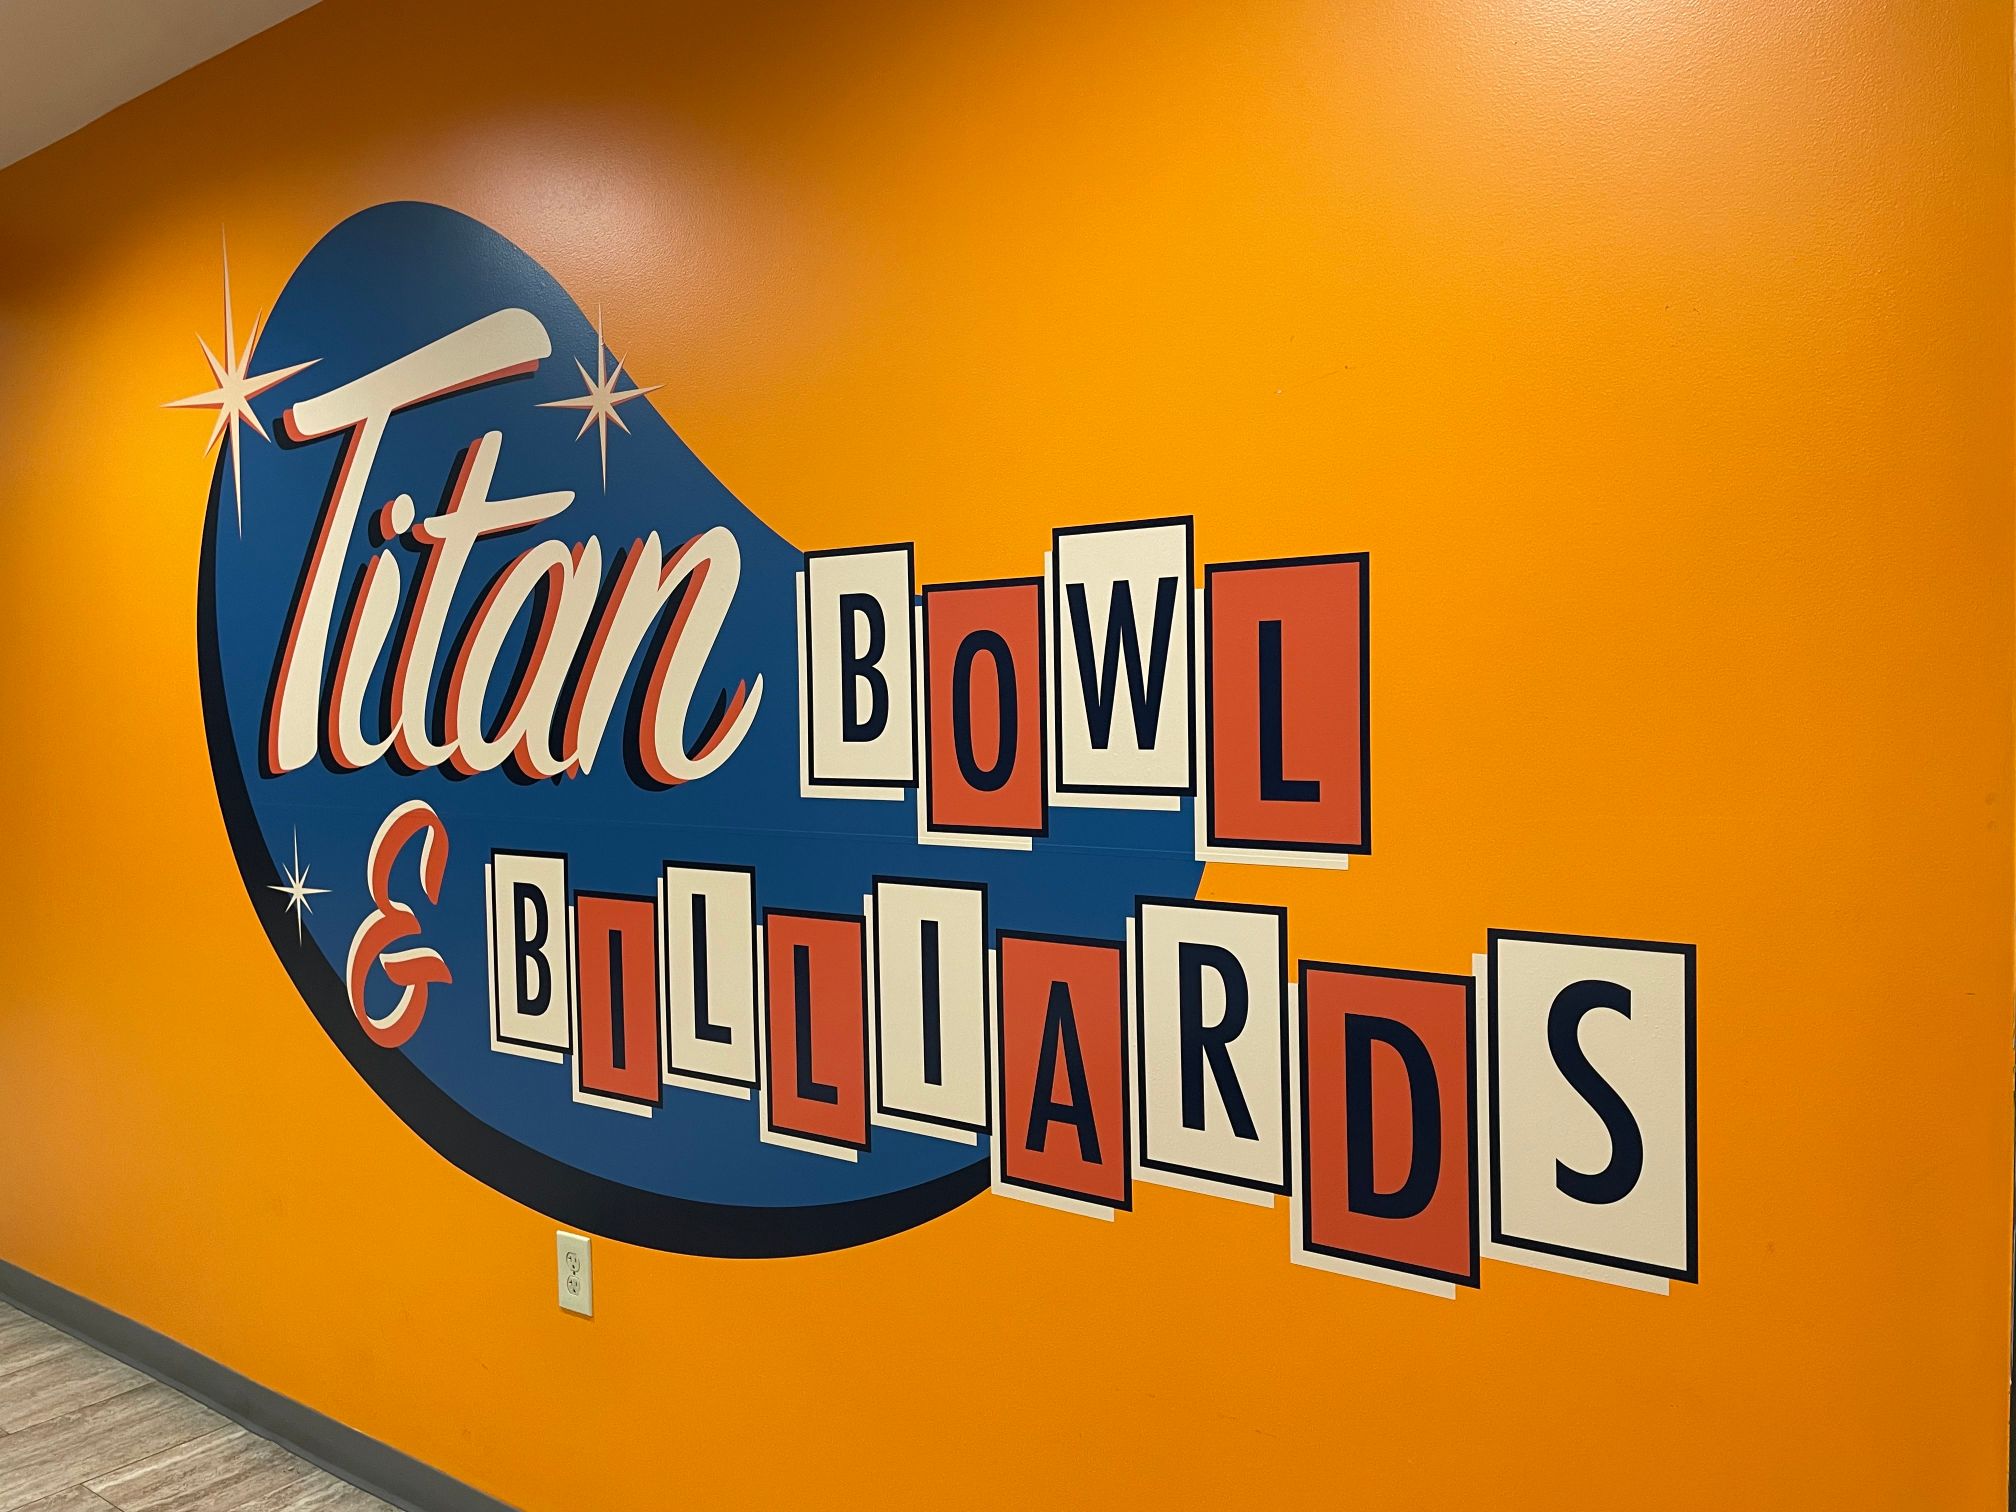 Retro Wall Graphics Add Pizzazz to Cal State Fullerton Student Union